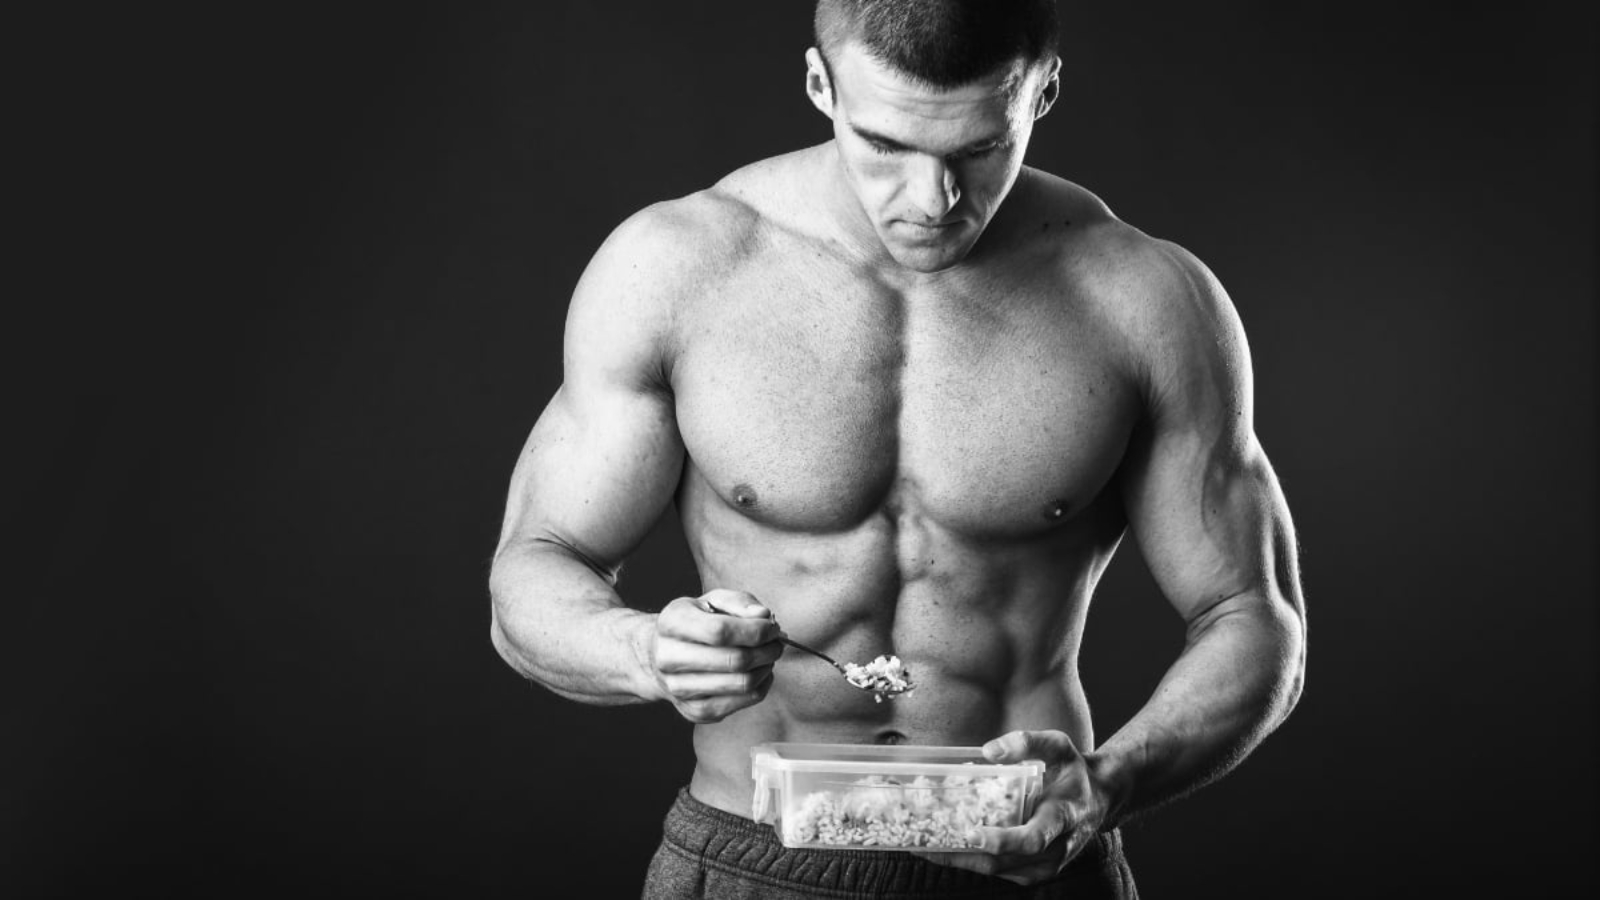 How Much Should I Eat Per Day To Gain Muscle Mass?